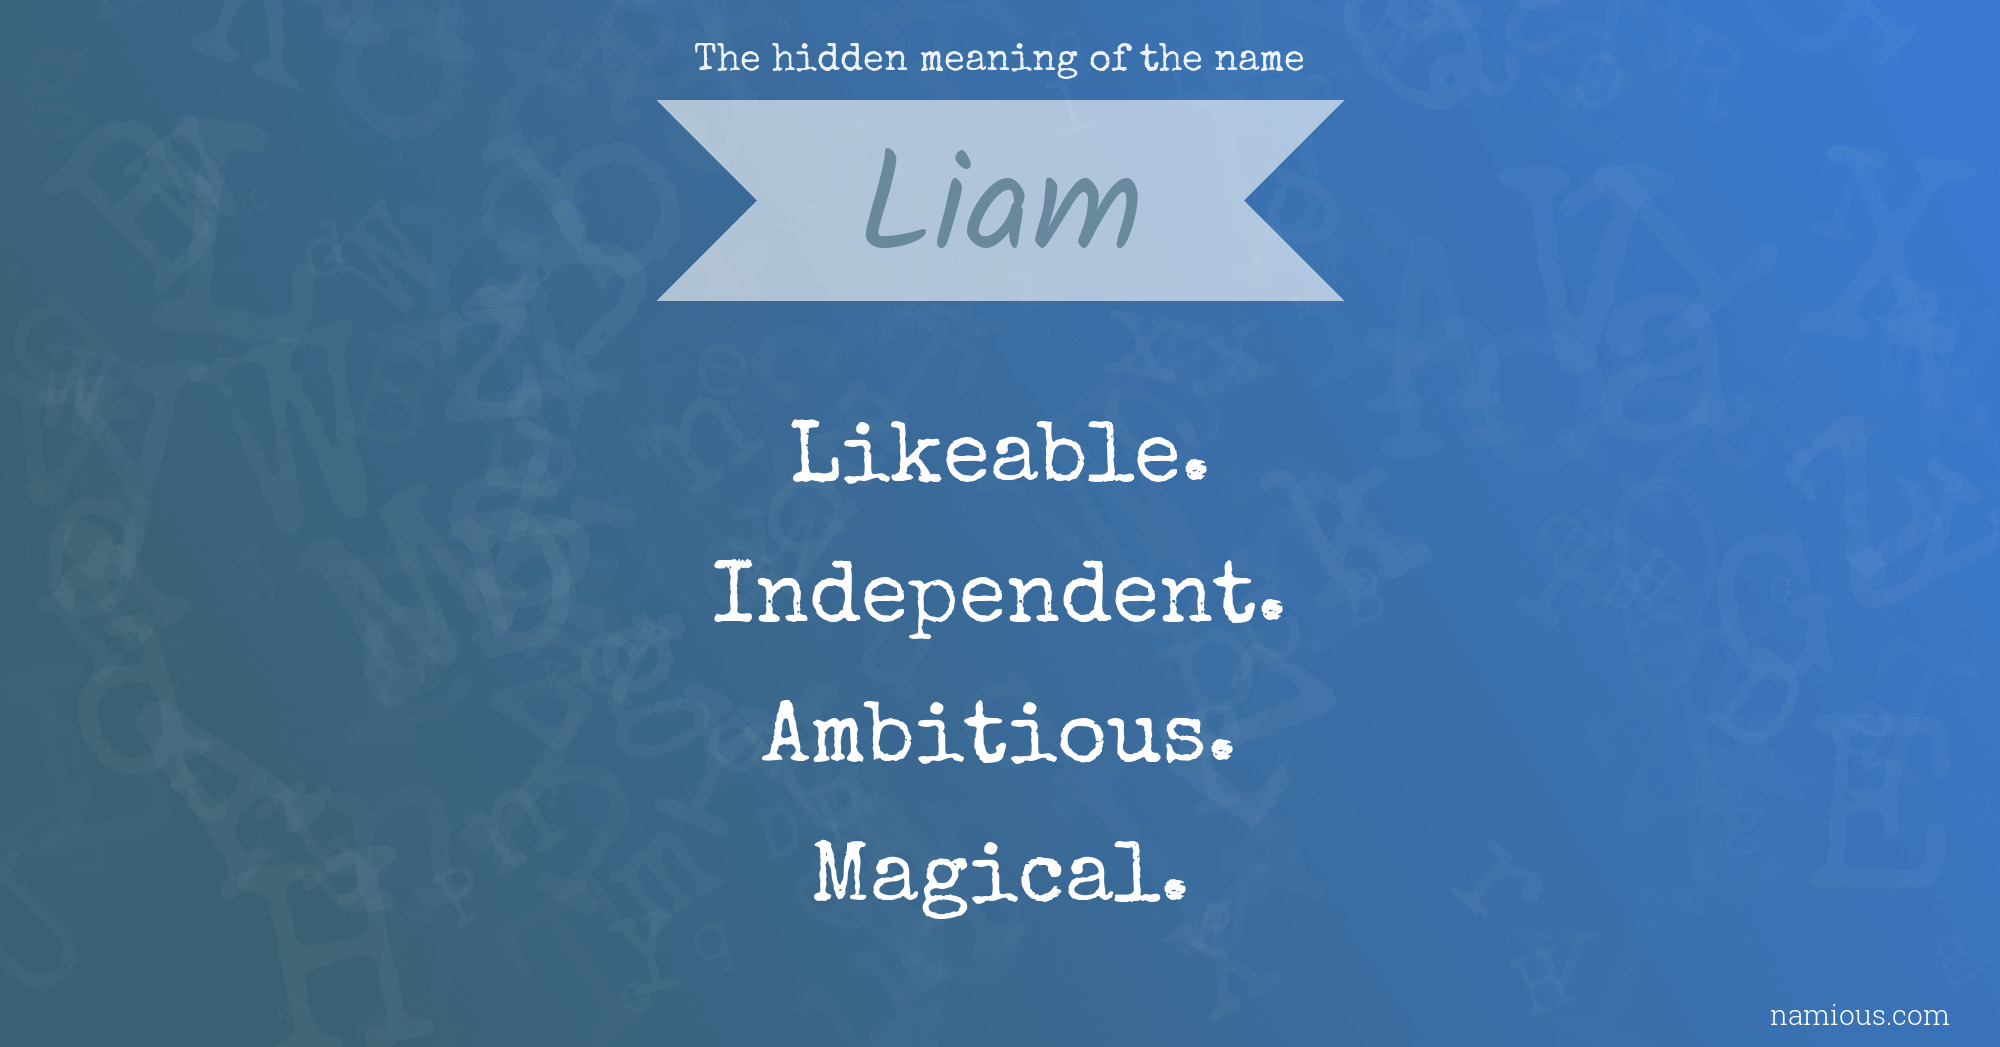 The hidden meaning of the name Liam | Namious